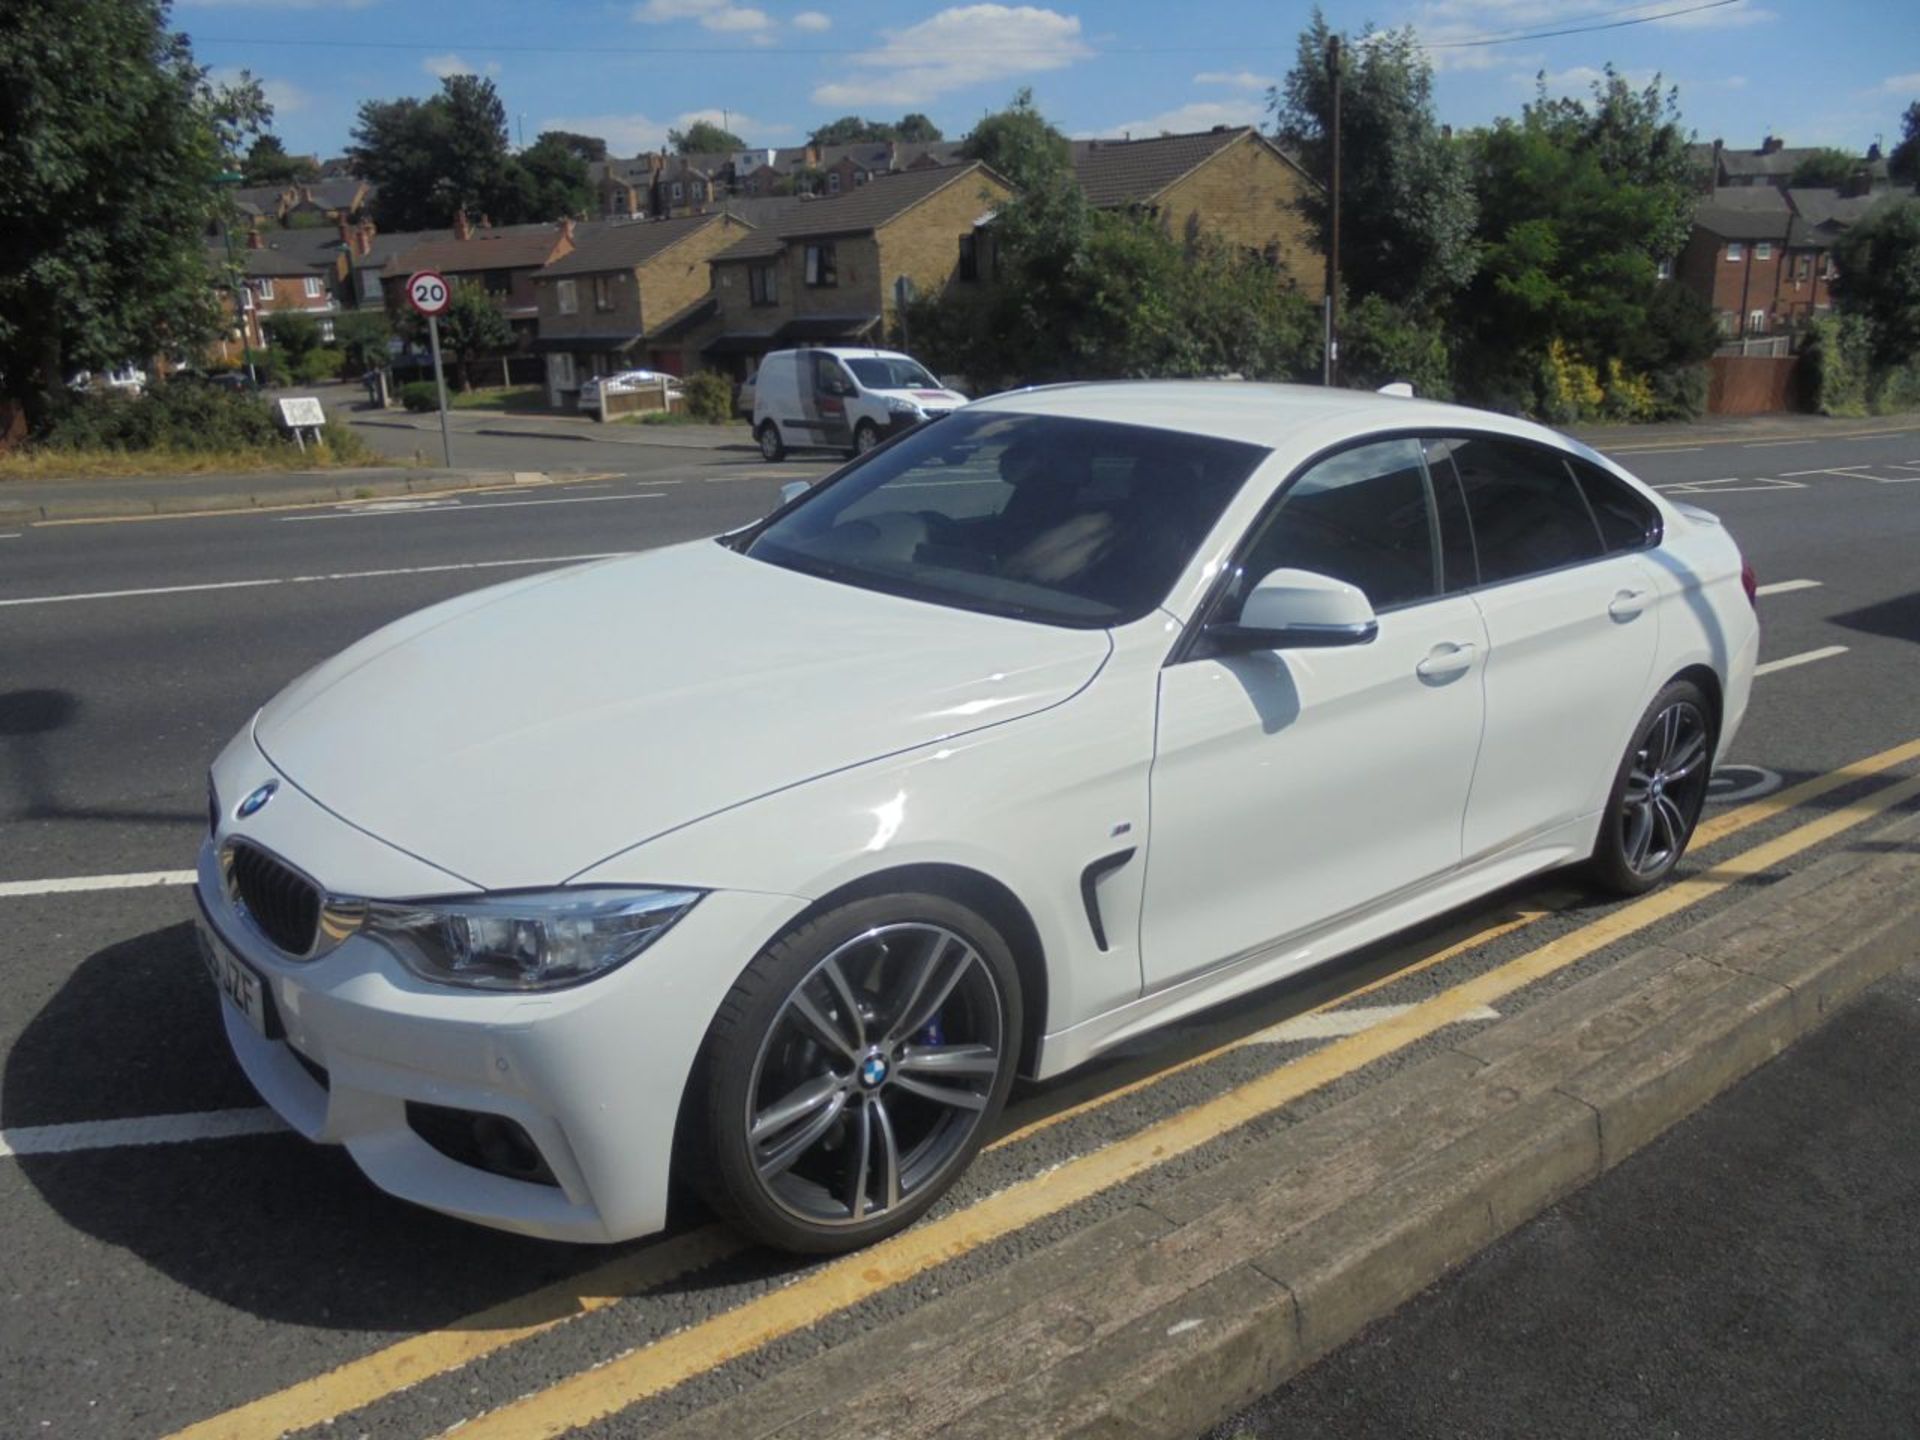 2015 (65 REG), BMW 4 SERIES GRAN COUPE 3.0 435I M SPORT GRAN COUPE AUTO 5DR COUPE, 1,200 MILES ONLY - Image 7 of 11